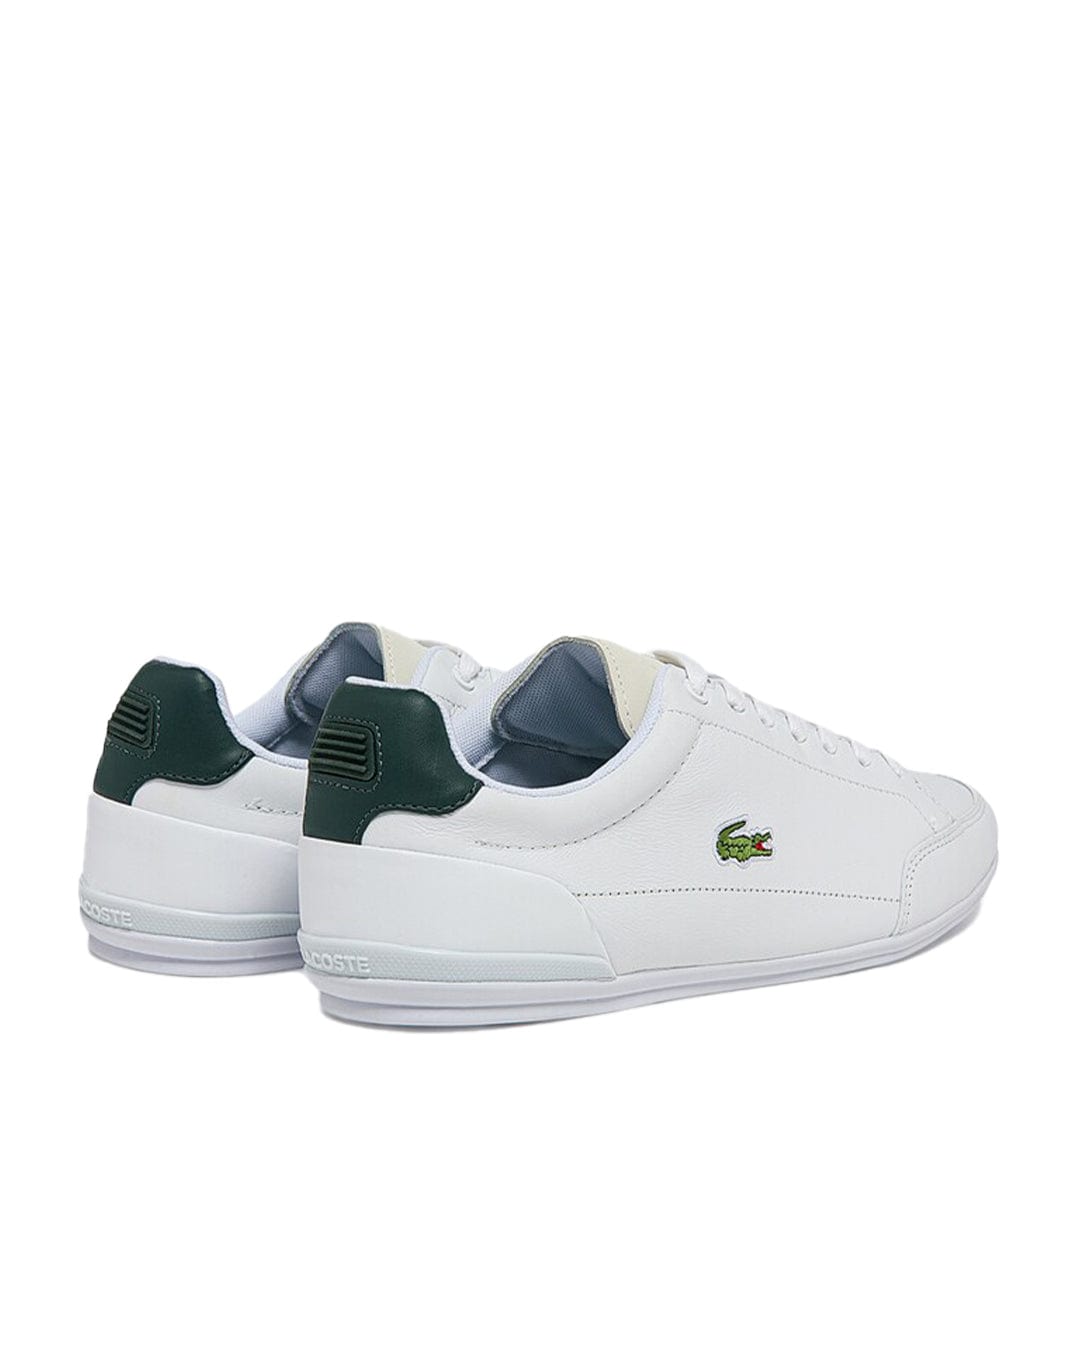 Lacoste Shoes Lacoste Chaymon White And Green Sneakers